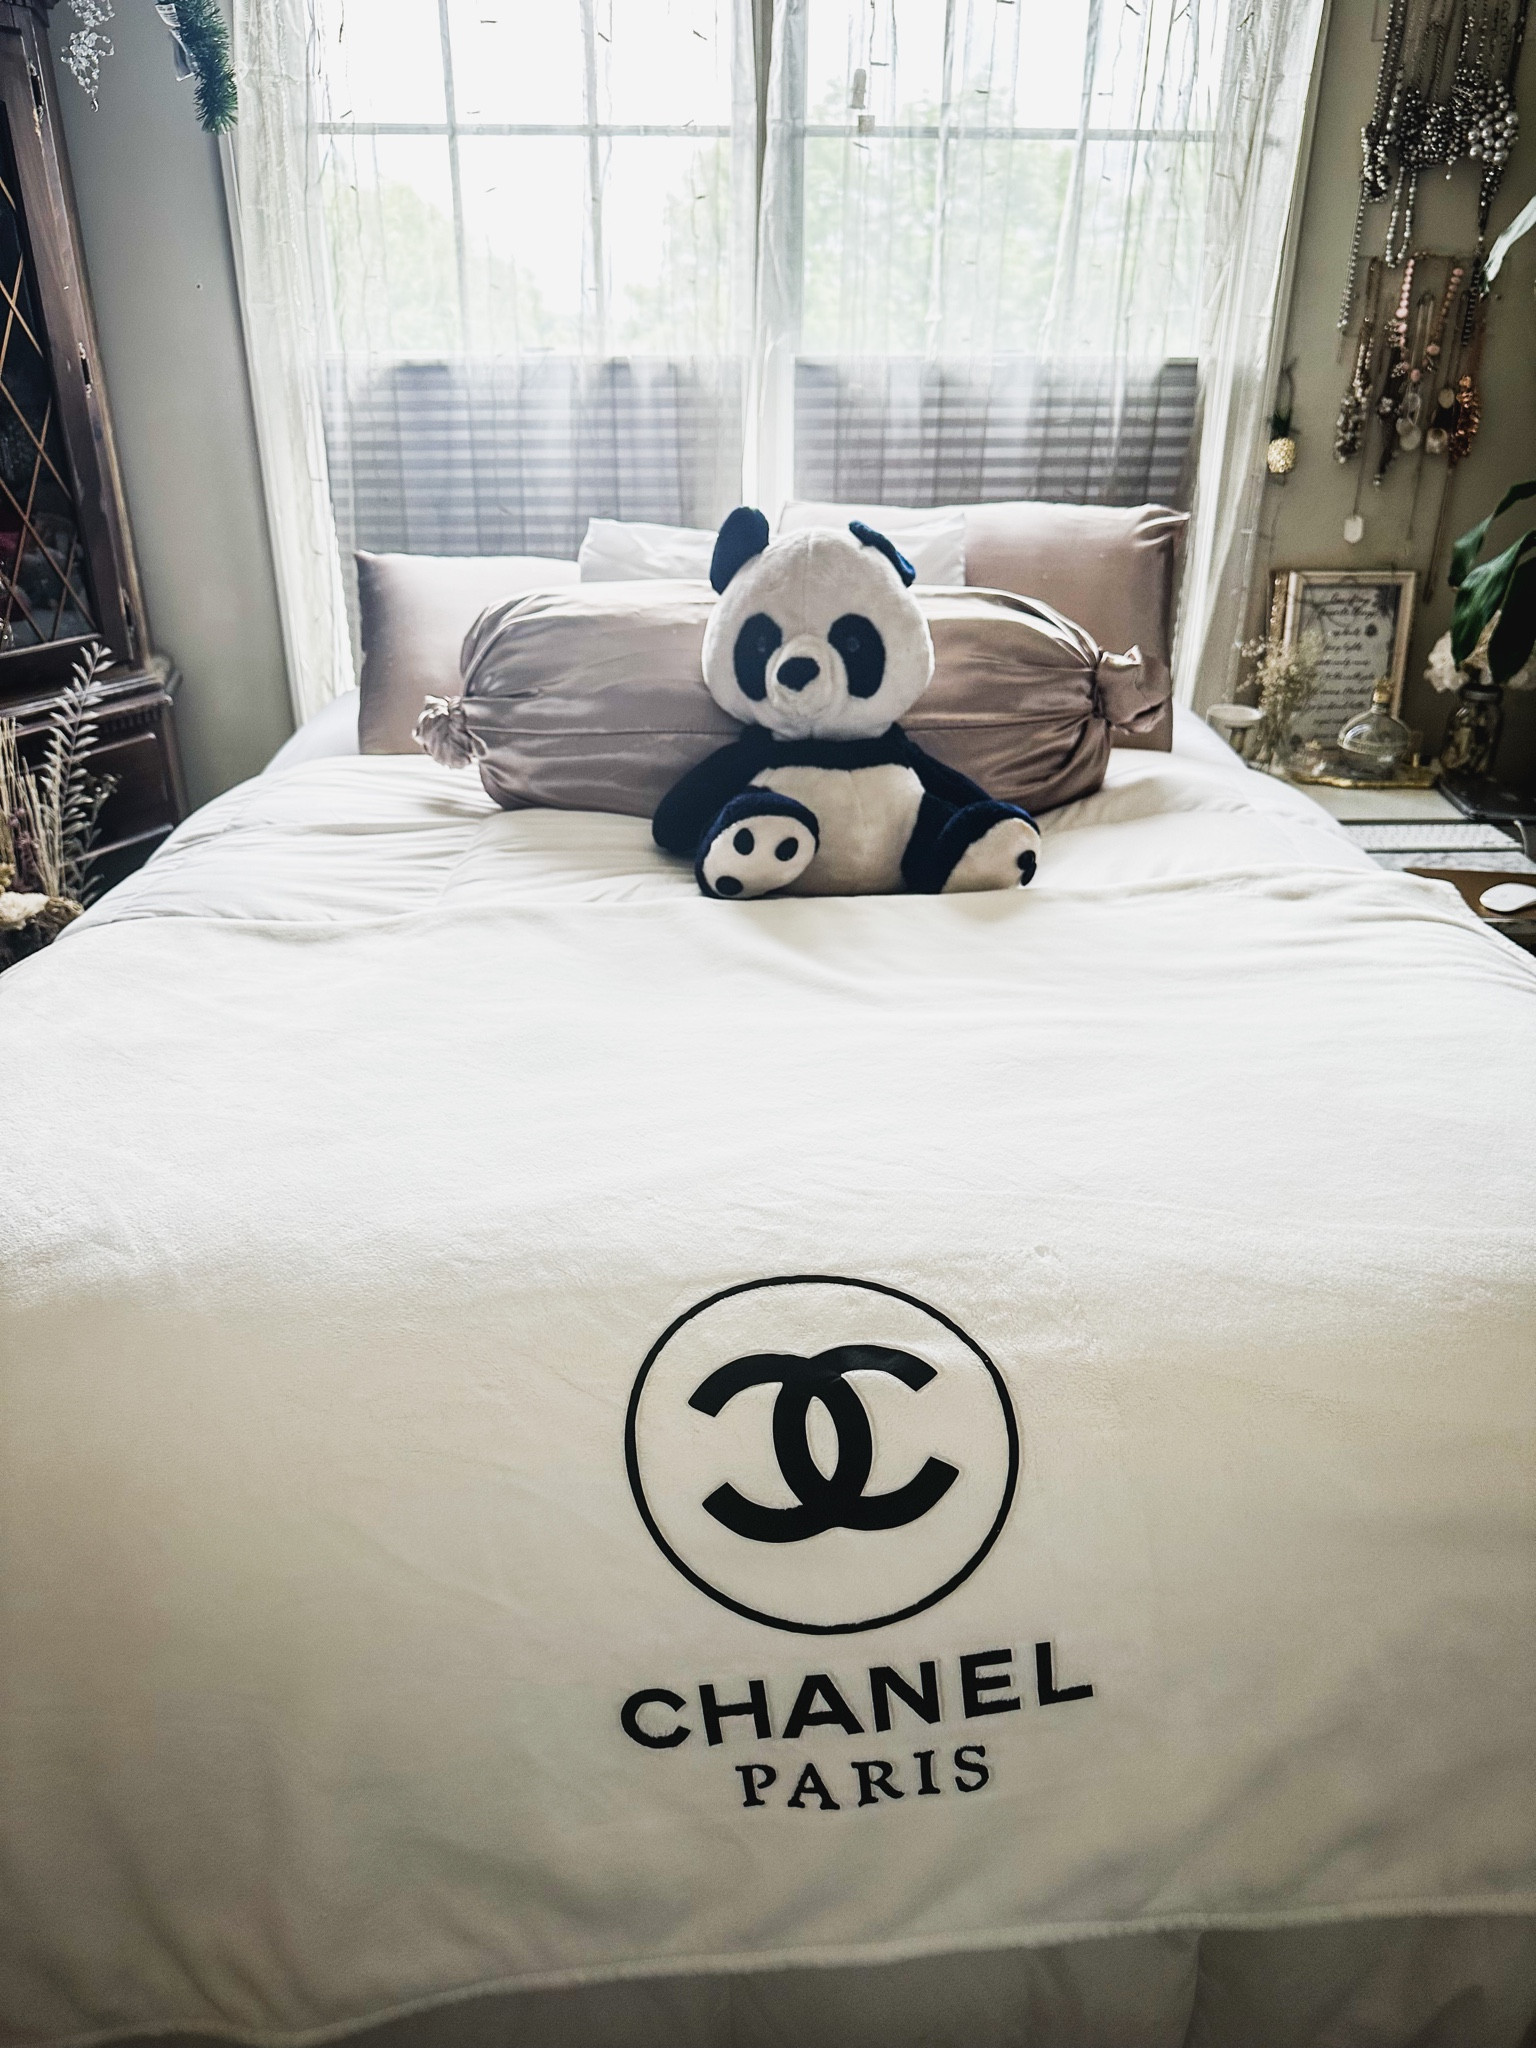 Beckham Hotel Collection Bed … curated on LTK